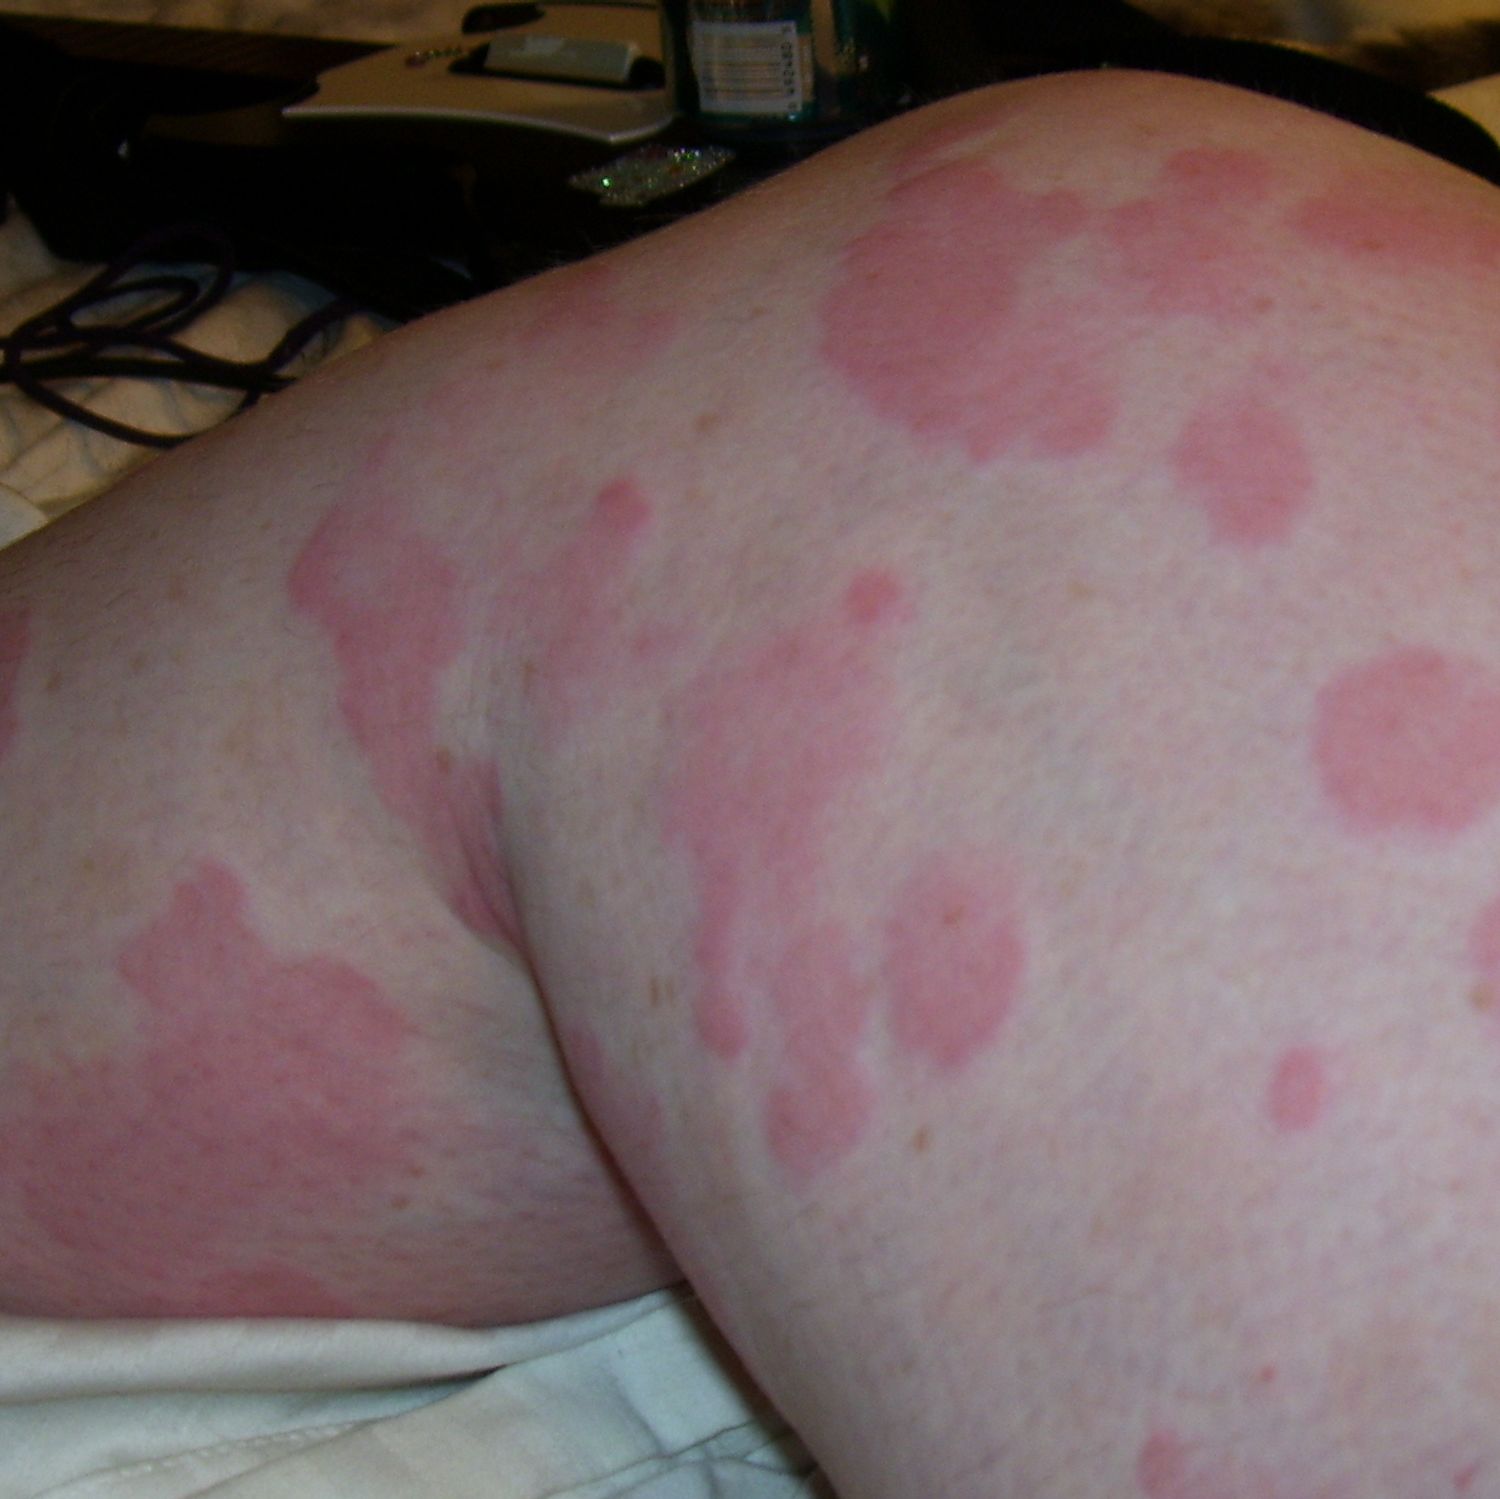 itchy skin hives